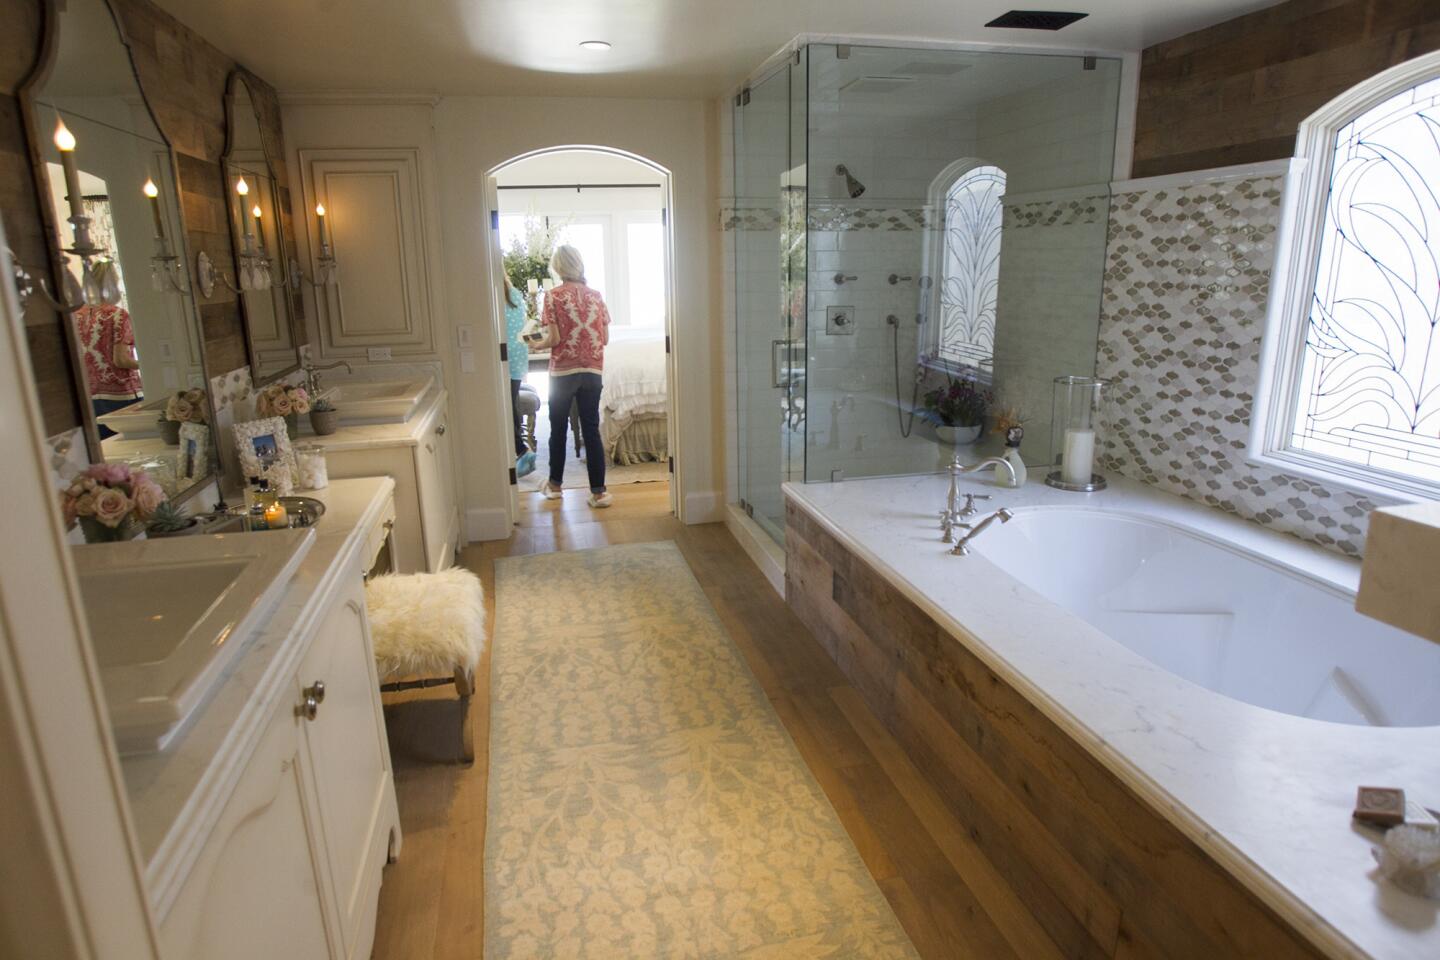 Guests take a look at the view from the master bathroom at the Buntmann Residence at 2054 East Oceanfront during the Newport Harbor Home tour on Thursday, May 15. (Scott Smeltzer - Daily Pilot)